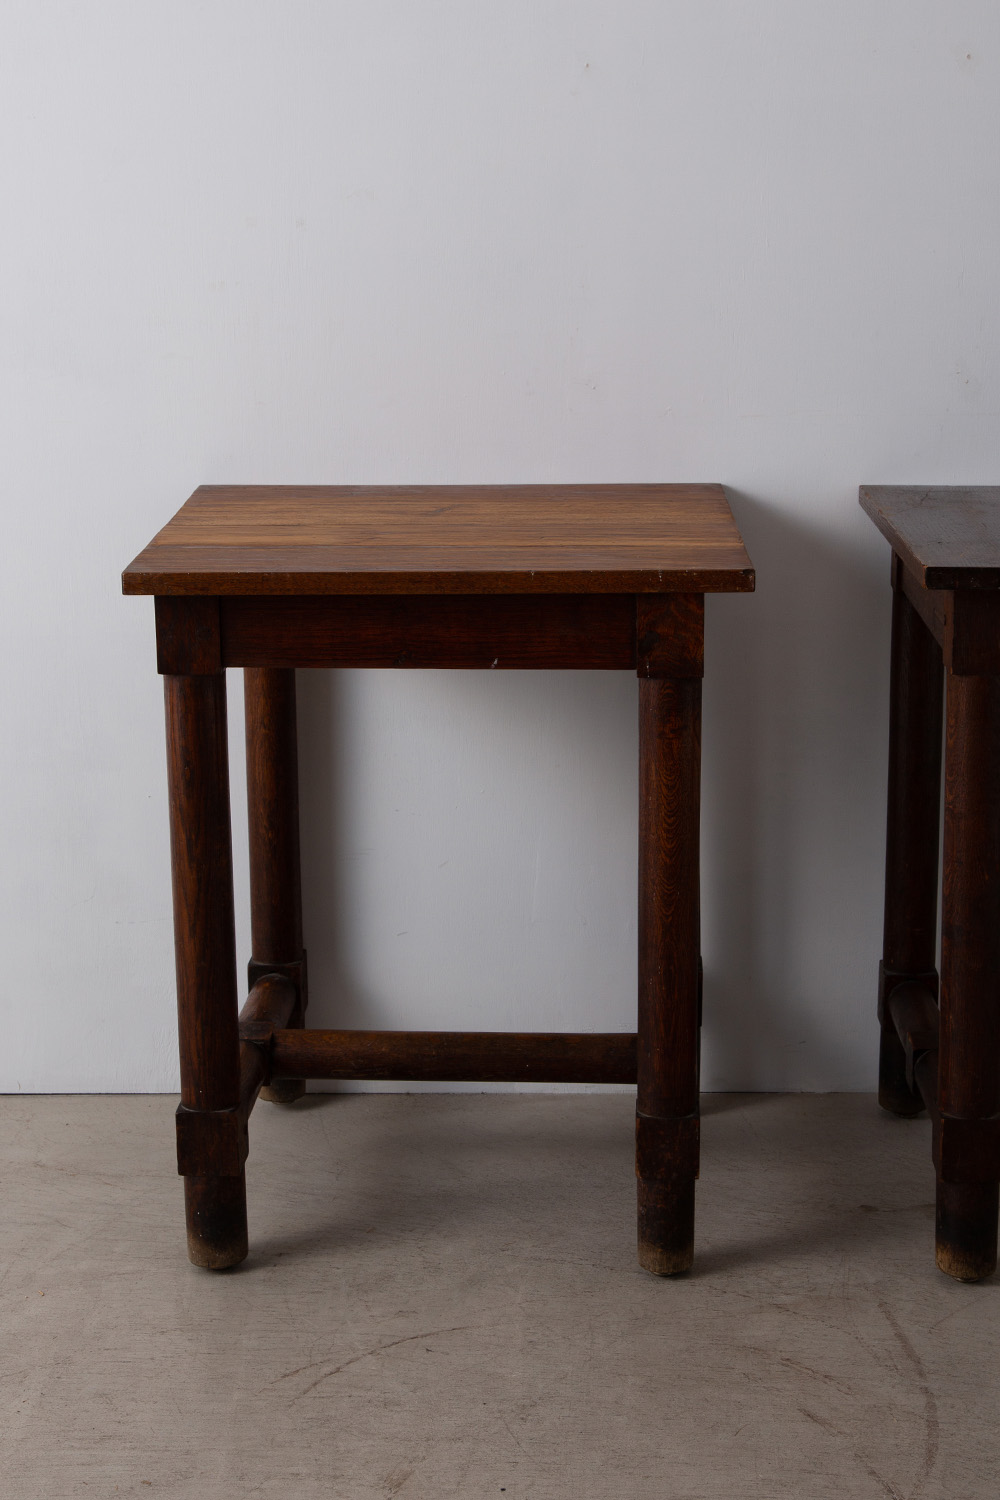 Antique Square Table in Wood